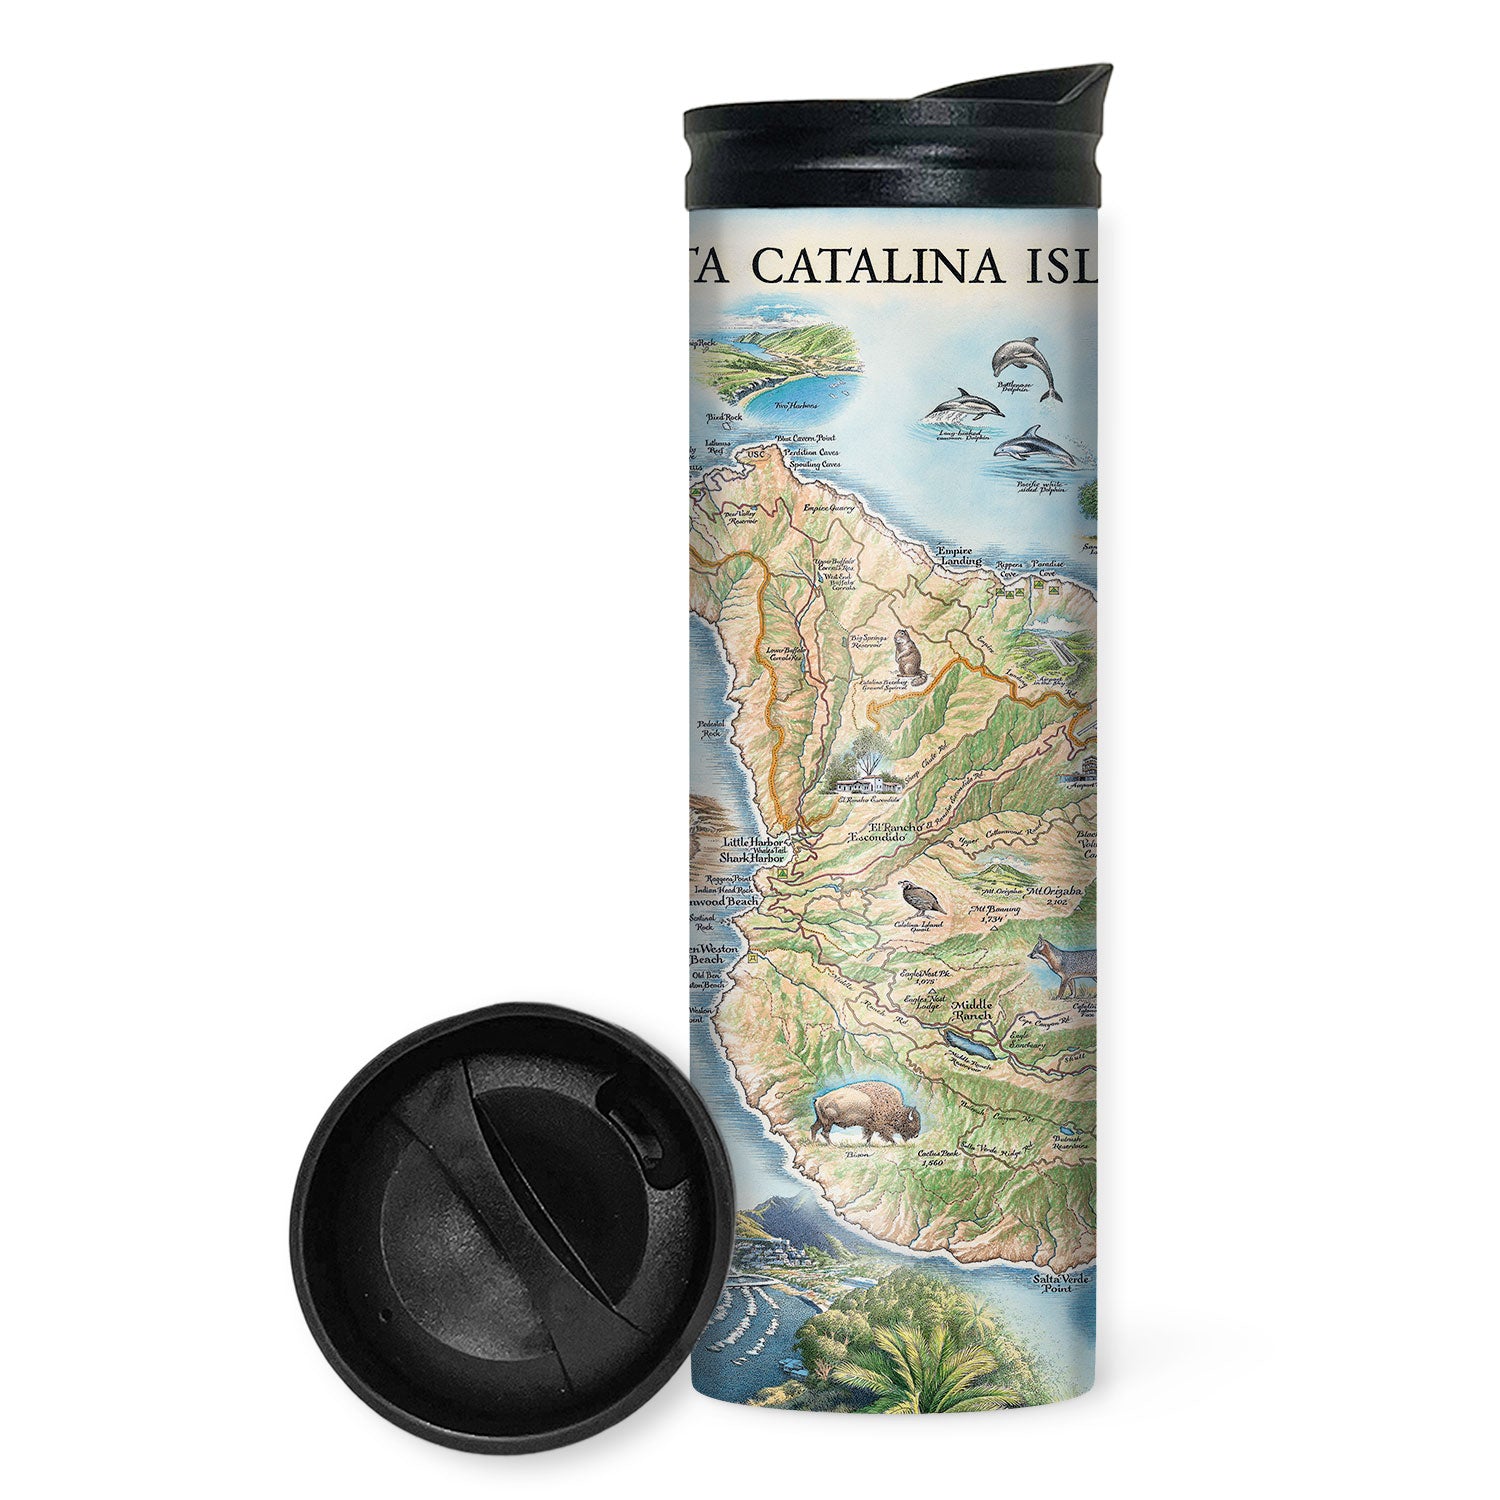 California’s Santa Catalina Island map 16 oz travel bottle in green and blue color. The map features illustrations of places such as Wrigley Memorial, El Rancho Escondido, and Avalon Bay. Flora and fauna include Bison, Catalina Island Fox, Catalina Orange Lip butterfly, Channel Islands tree poppy, and Island oak. 